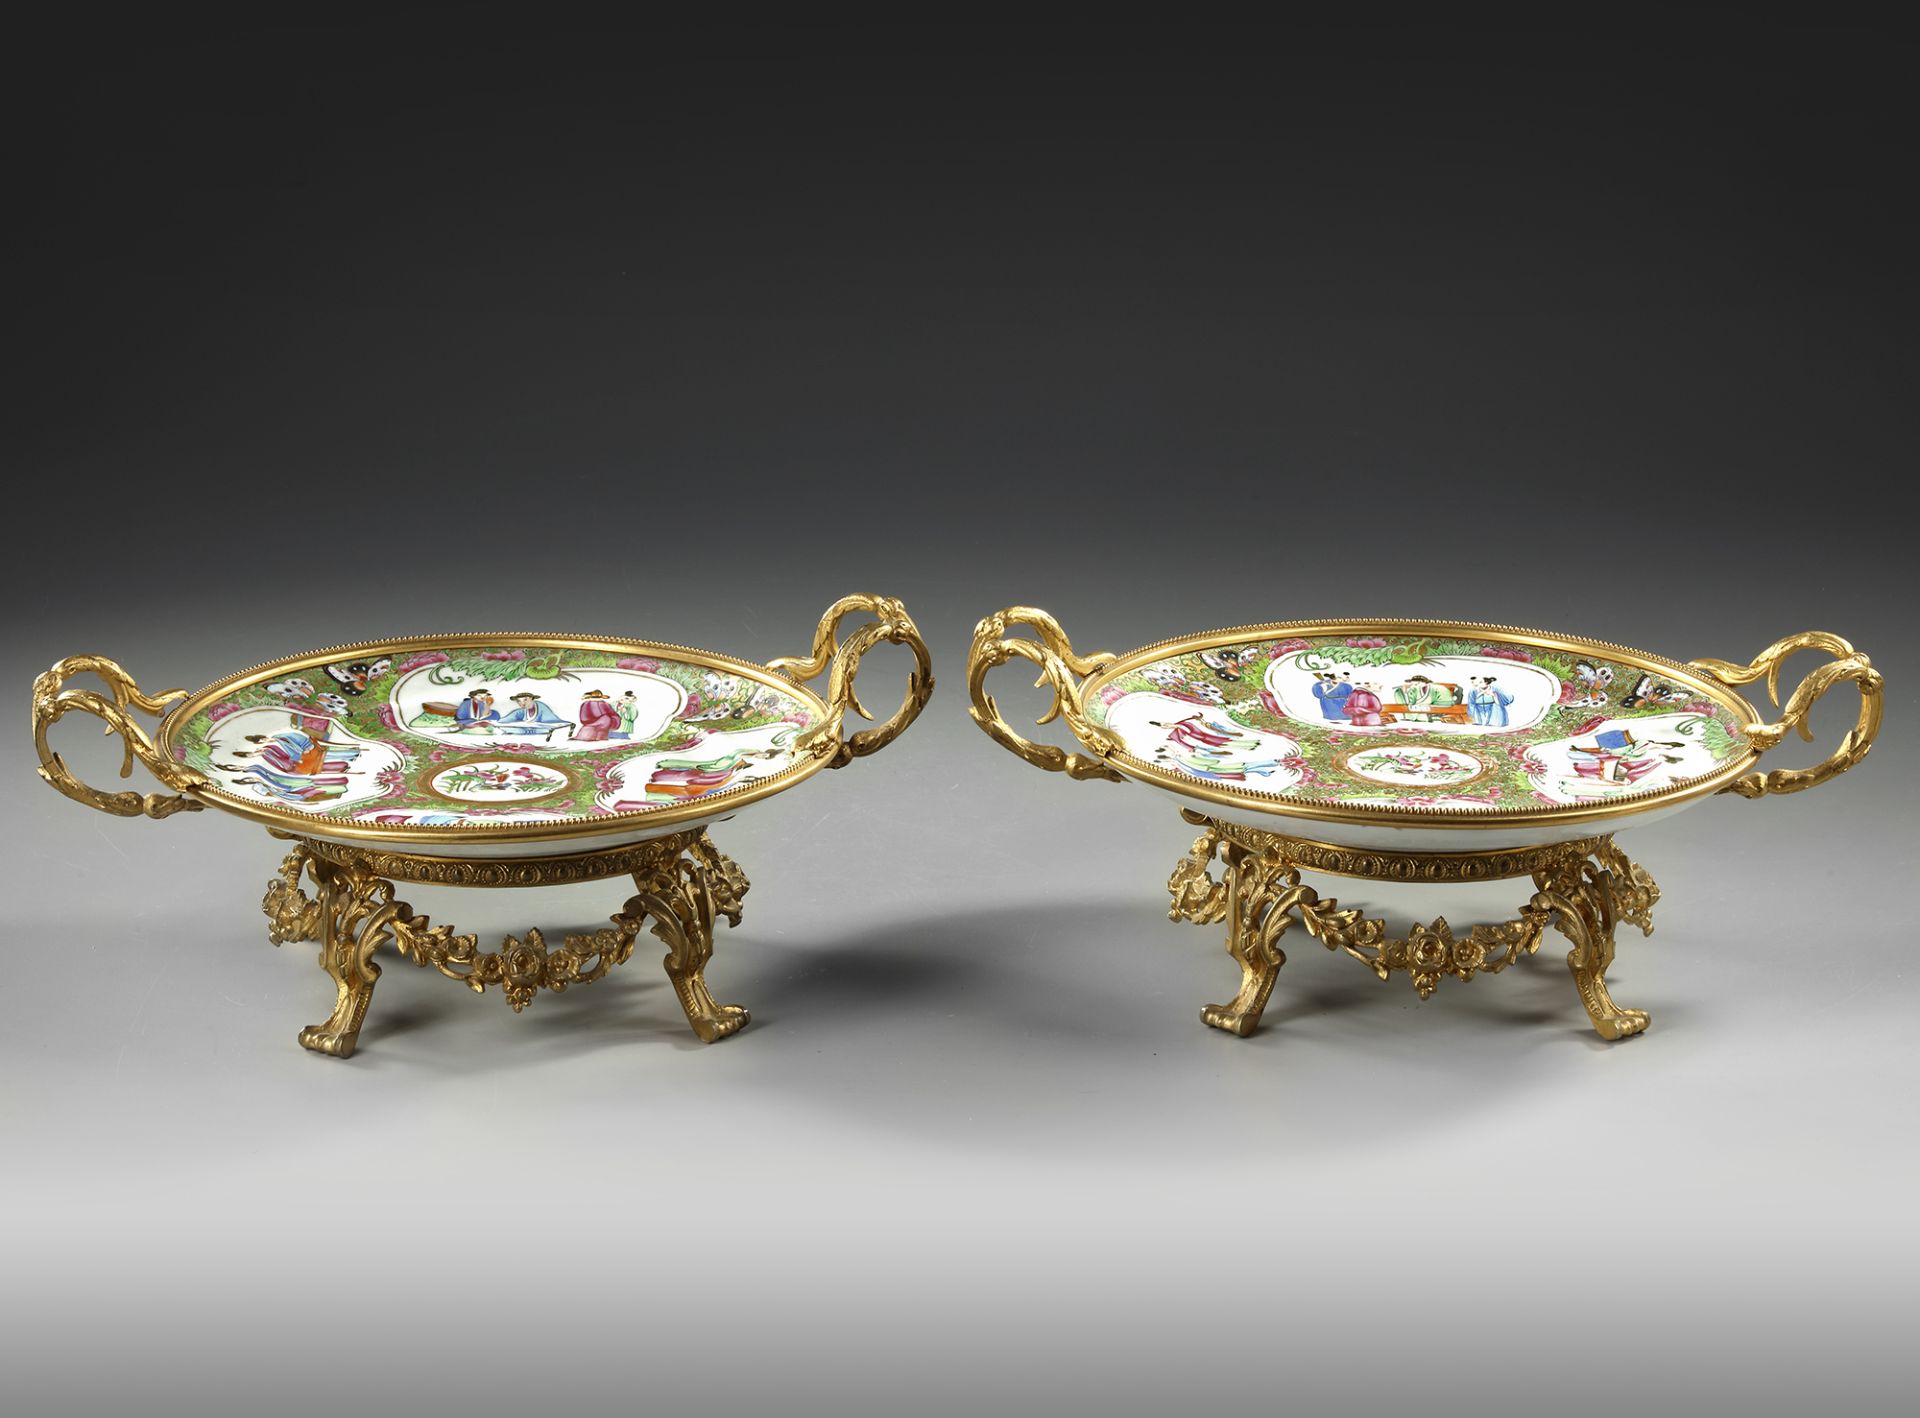 A PAIR OF CANTONESE PLATES, 20TH CENTURY